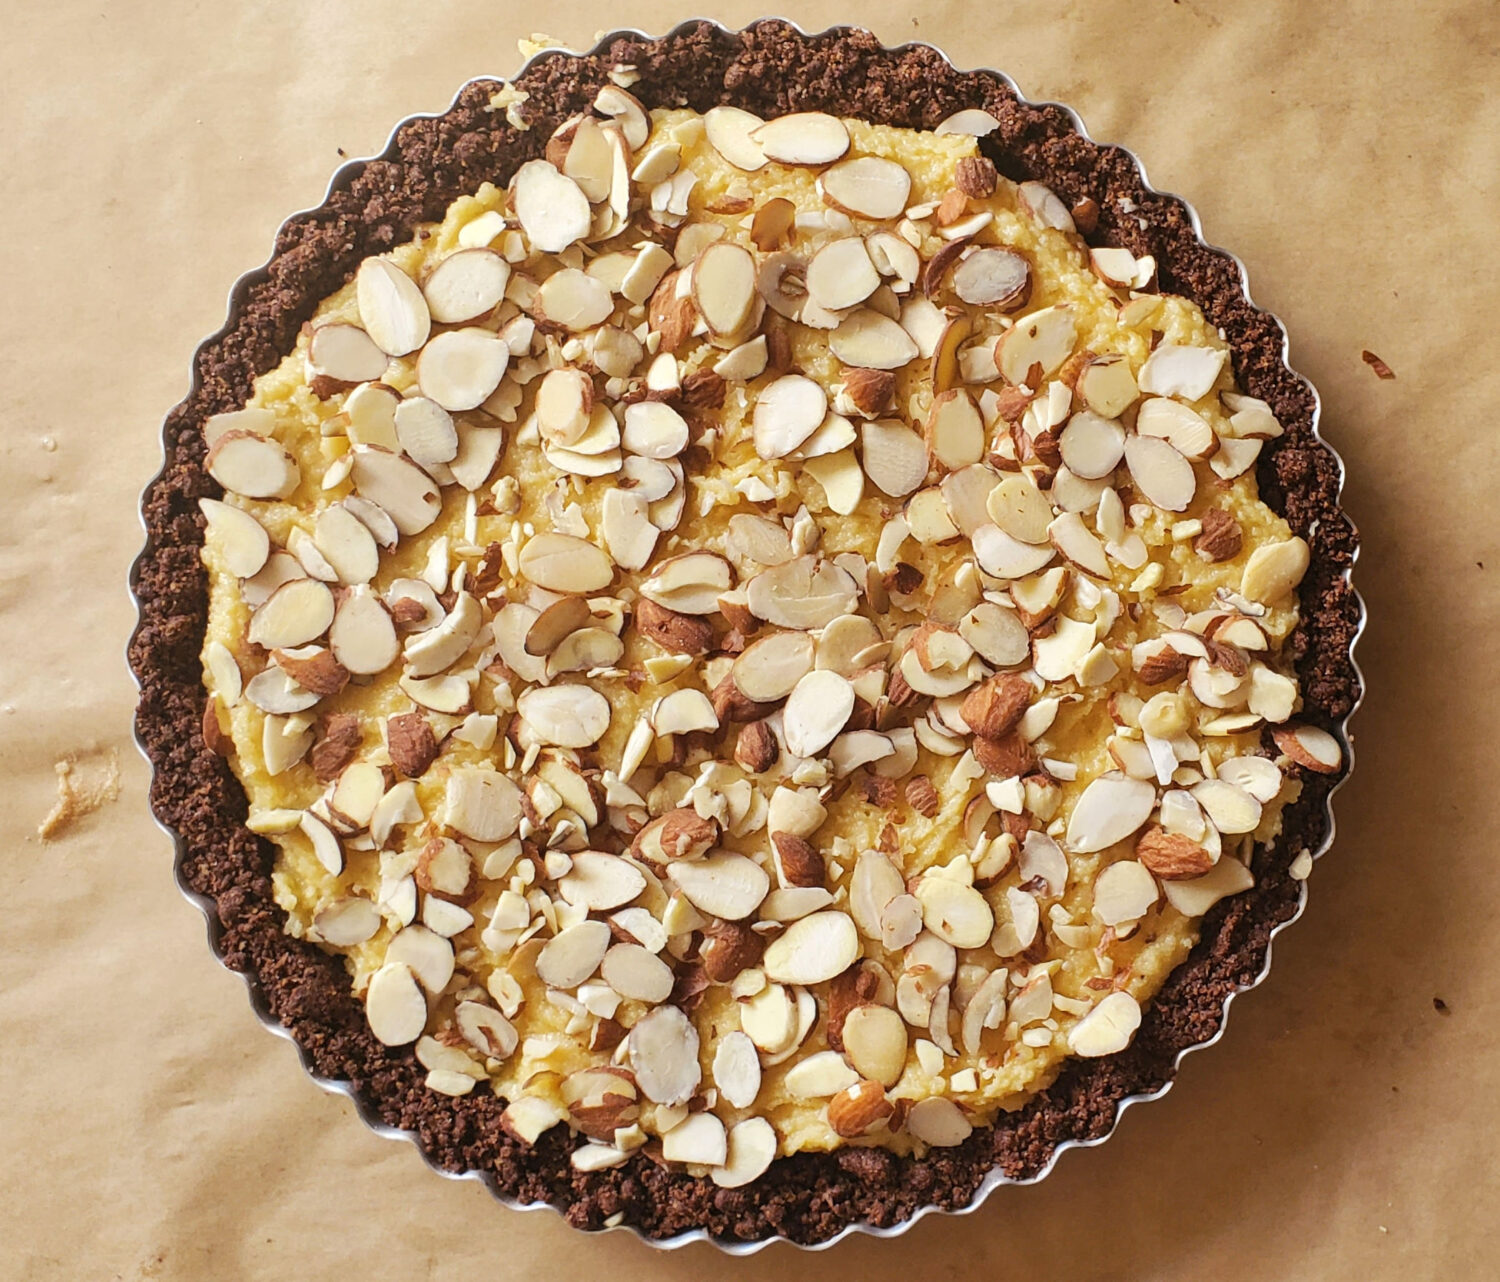 A moist, tender and creamy French almond filling, rippled with a layer of berry jam, topped with sliced almonds and baked in a chocolate almond crust.